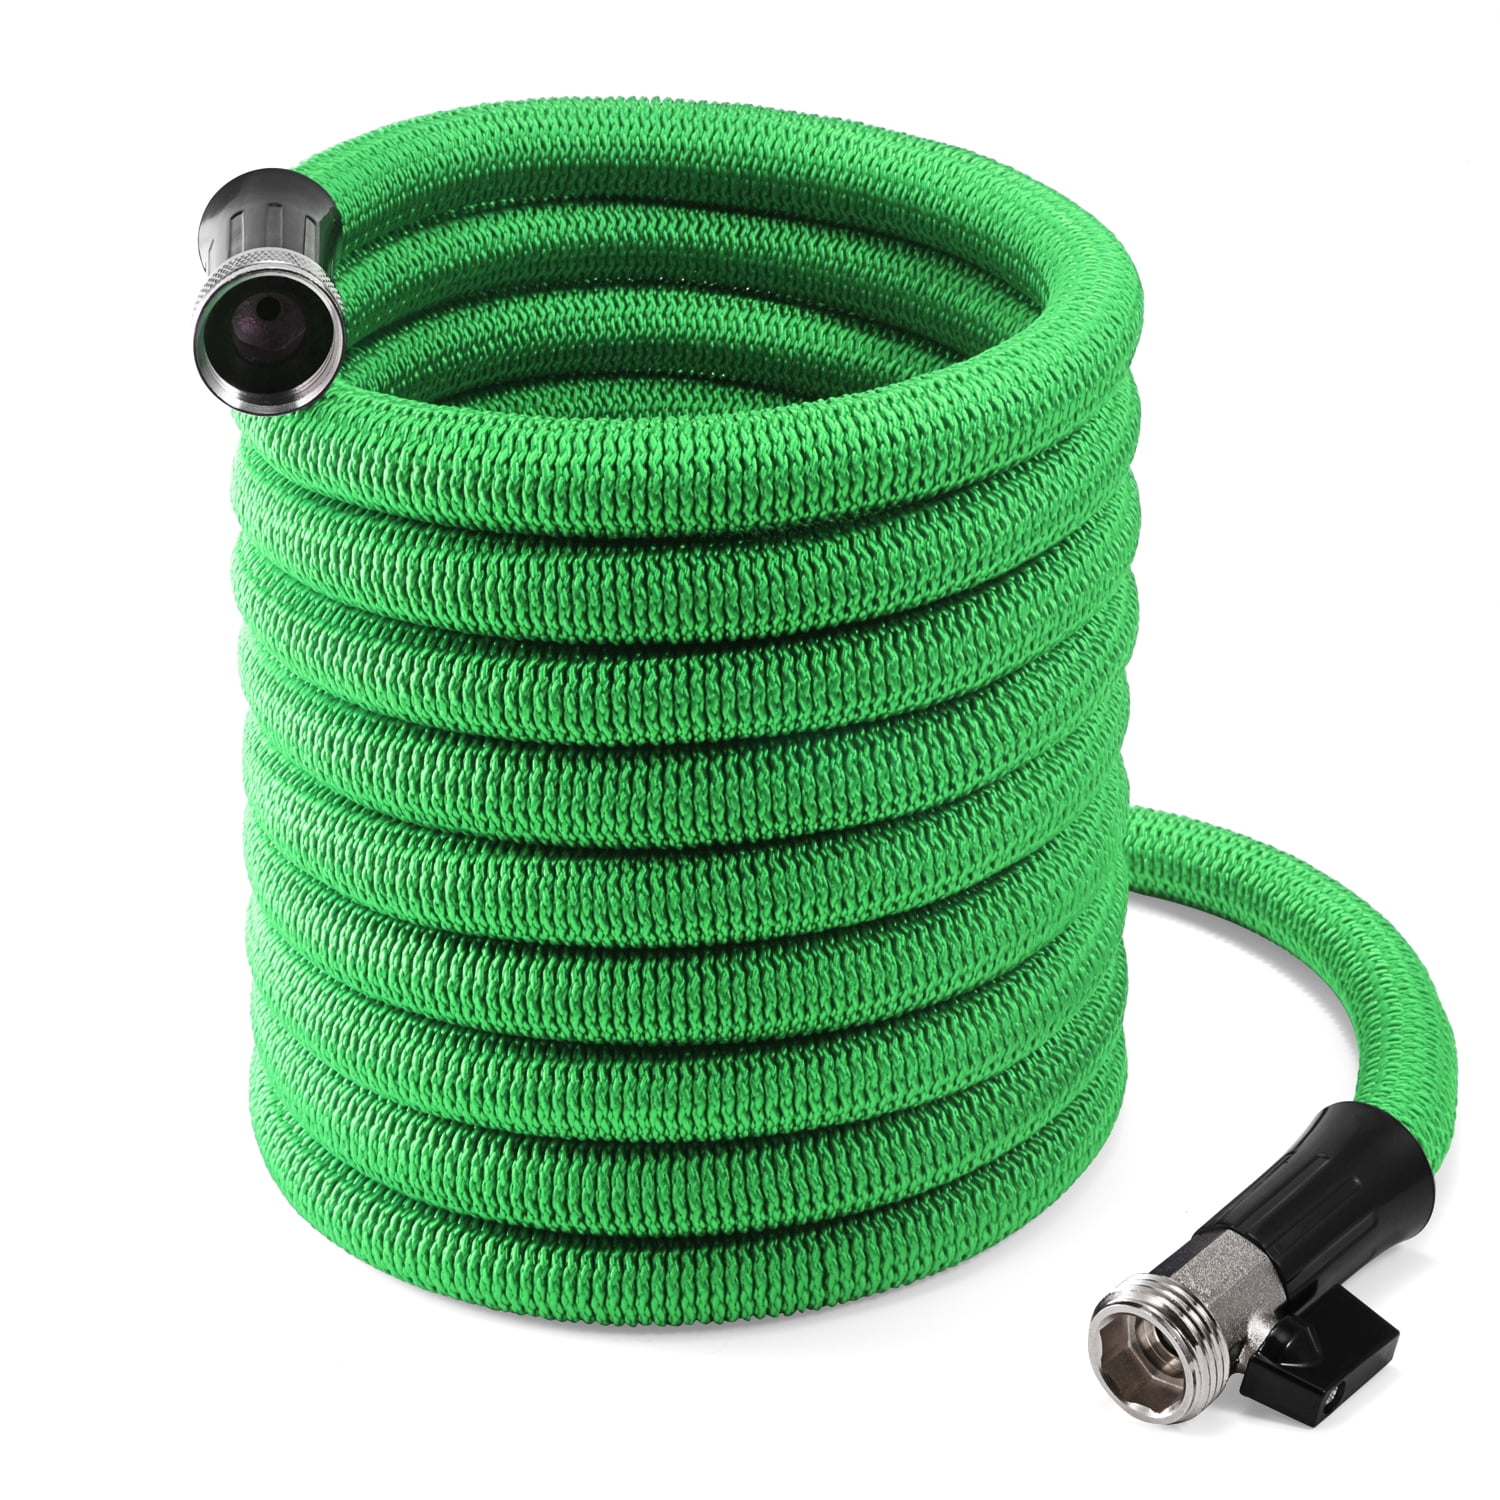 JUSTRITE 14415 Hose Attachment Flexible 5/8" Hose with Ground Funnel Safety New 